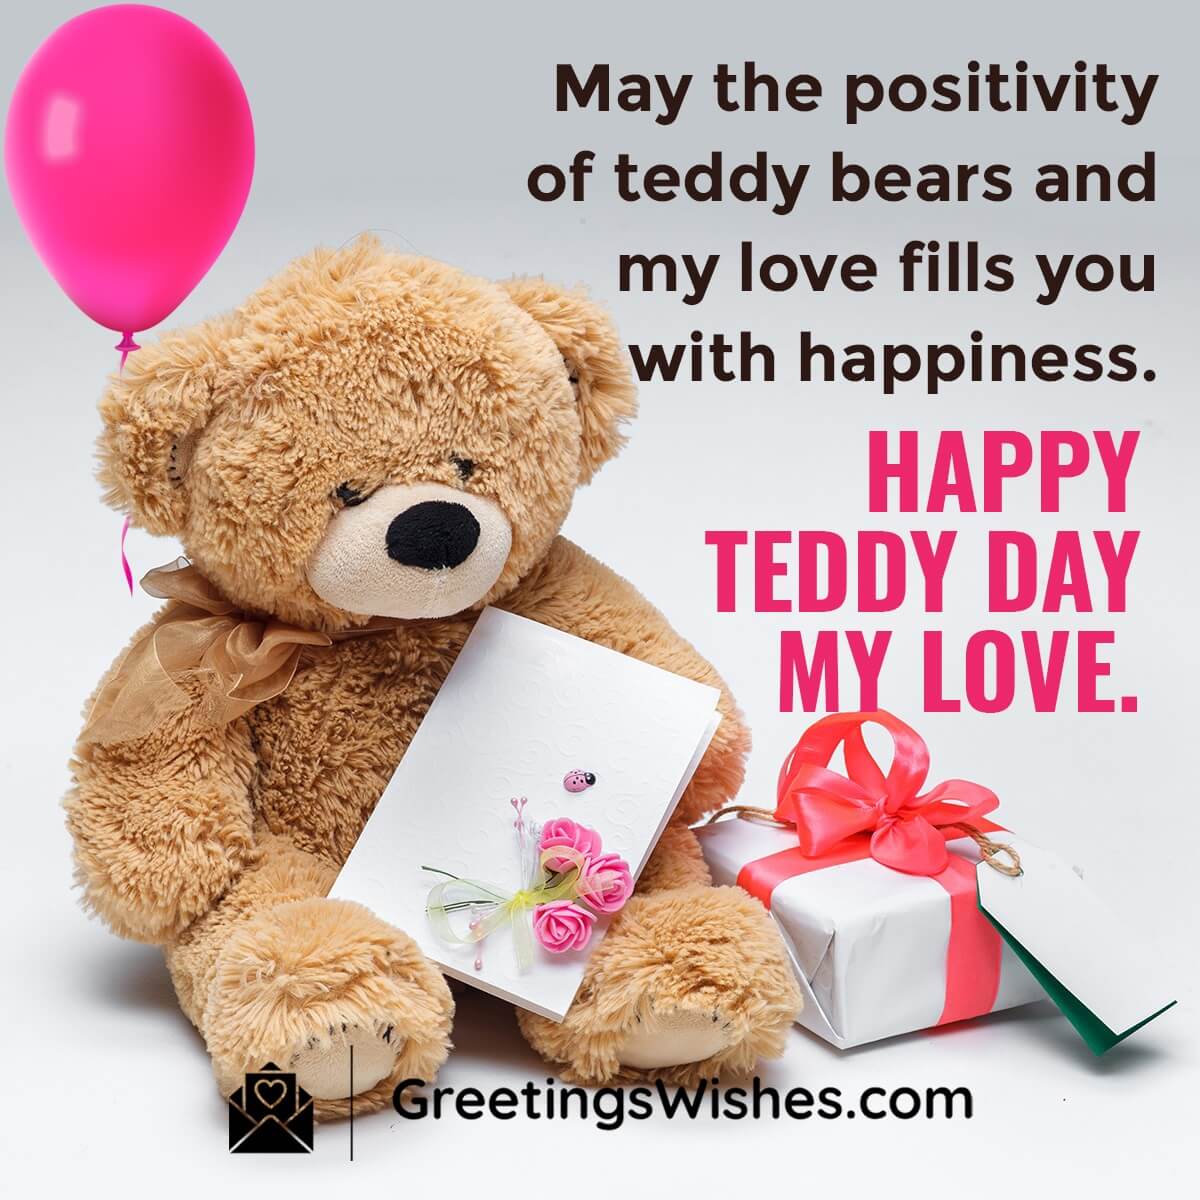 Happy Teddy Day Wish For My Love